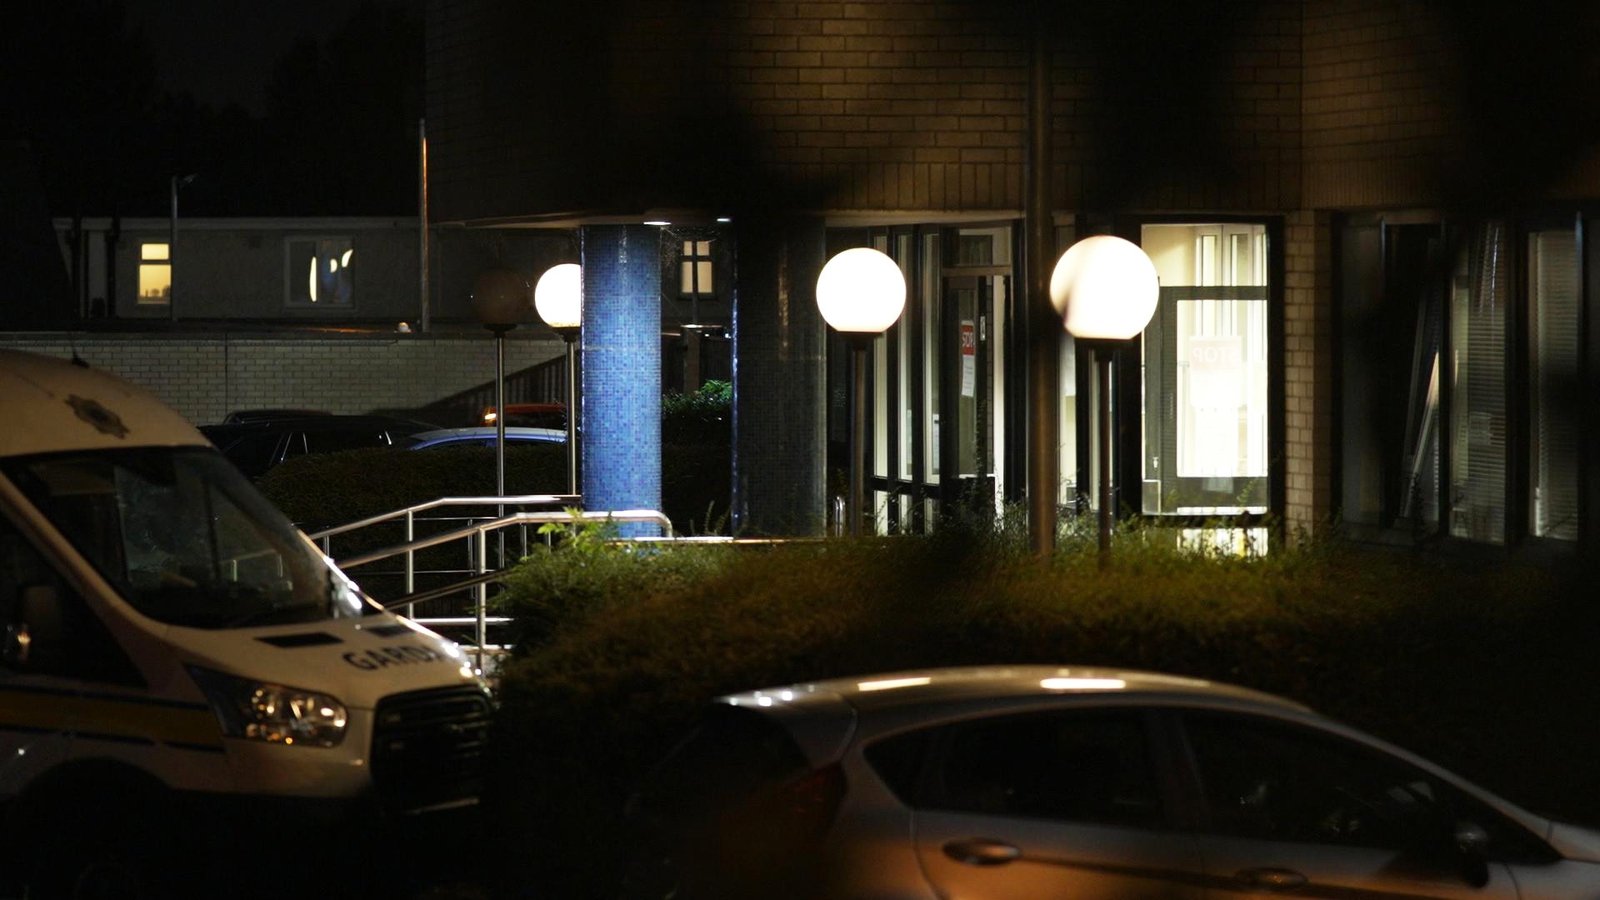 Image - Several staff members from the hospital reported their concerns relating to four patients to gardaí